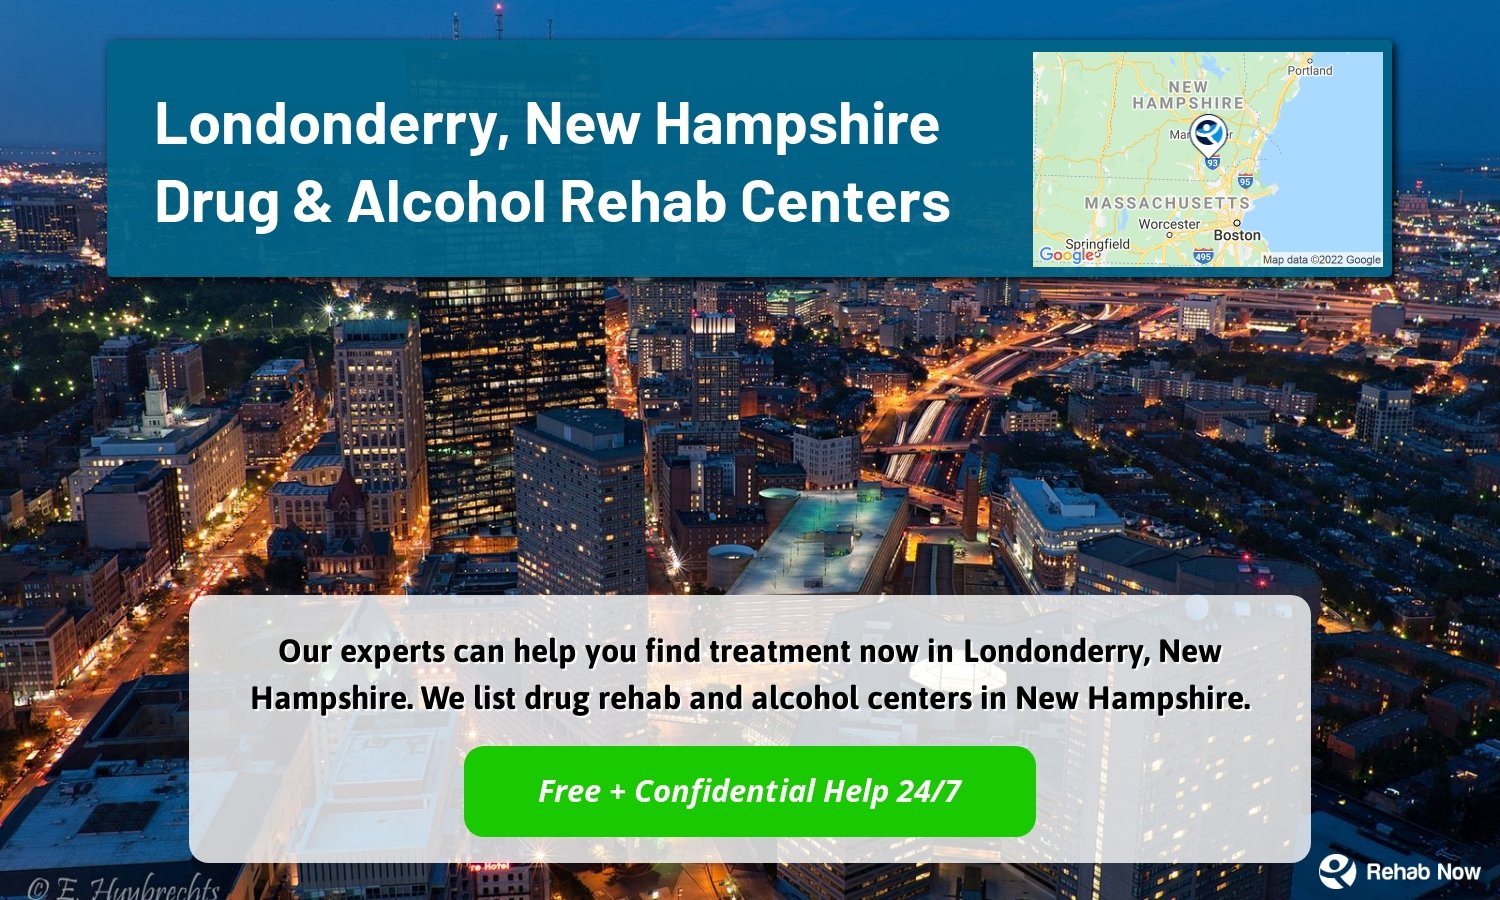 Our experts can help you find treatment now in Londonderry, New Hampshire. We list drug rehab and alcohol centers in New Hampshire.